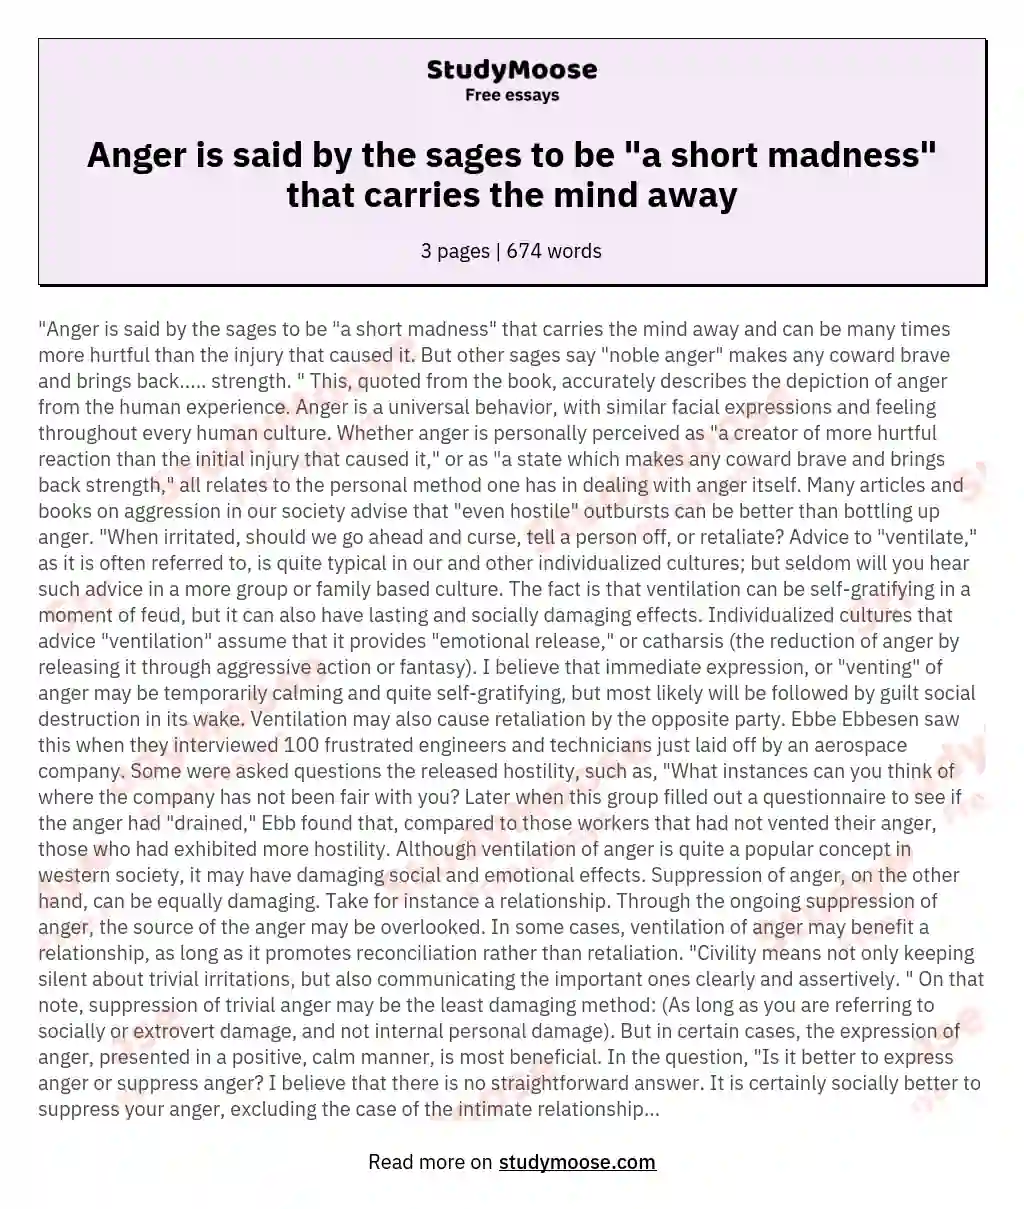 Anger is said by the sages to be "a short madness" that carries the mind away essay